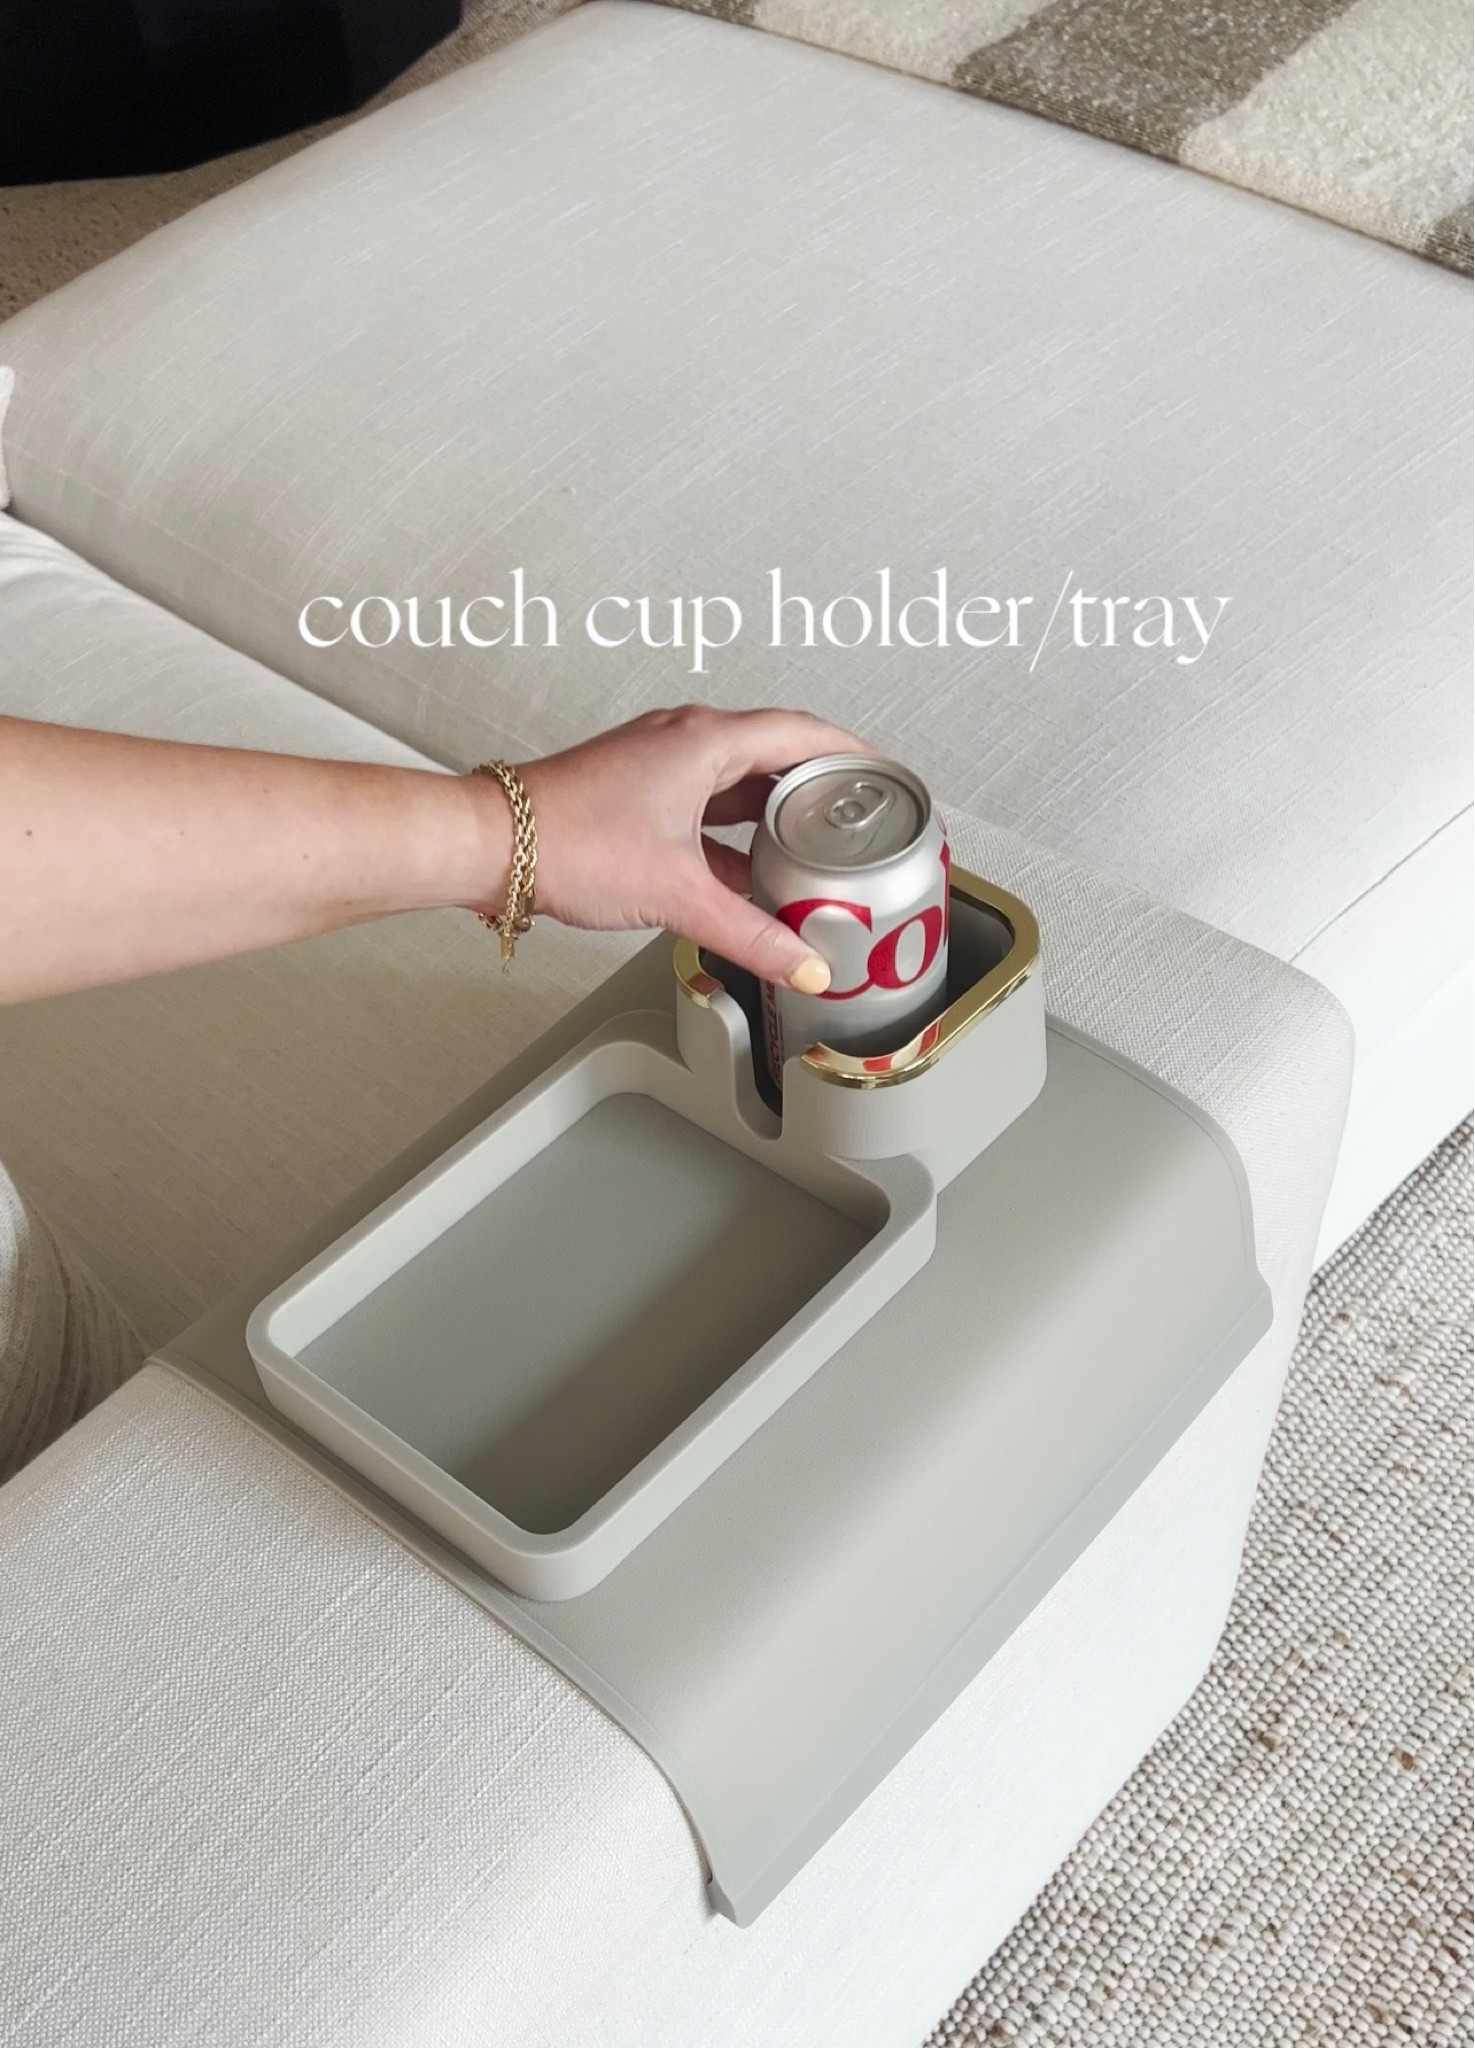 Couch Cup Holder Tray, Elimiko Silicone Anti-Spill and Anti-Slip